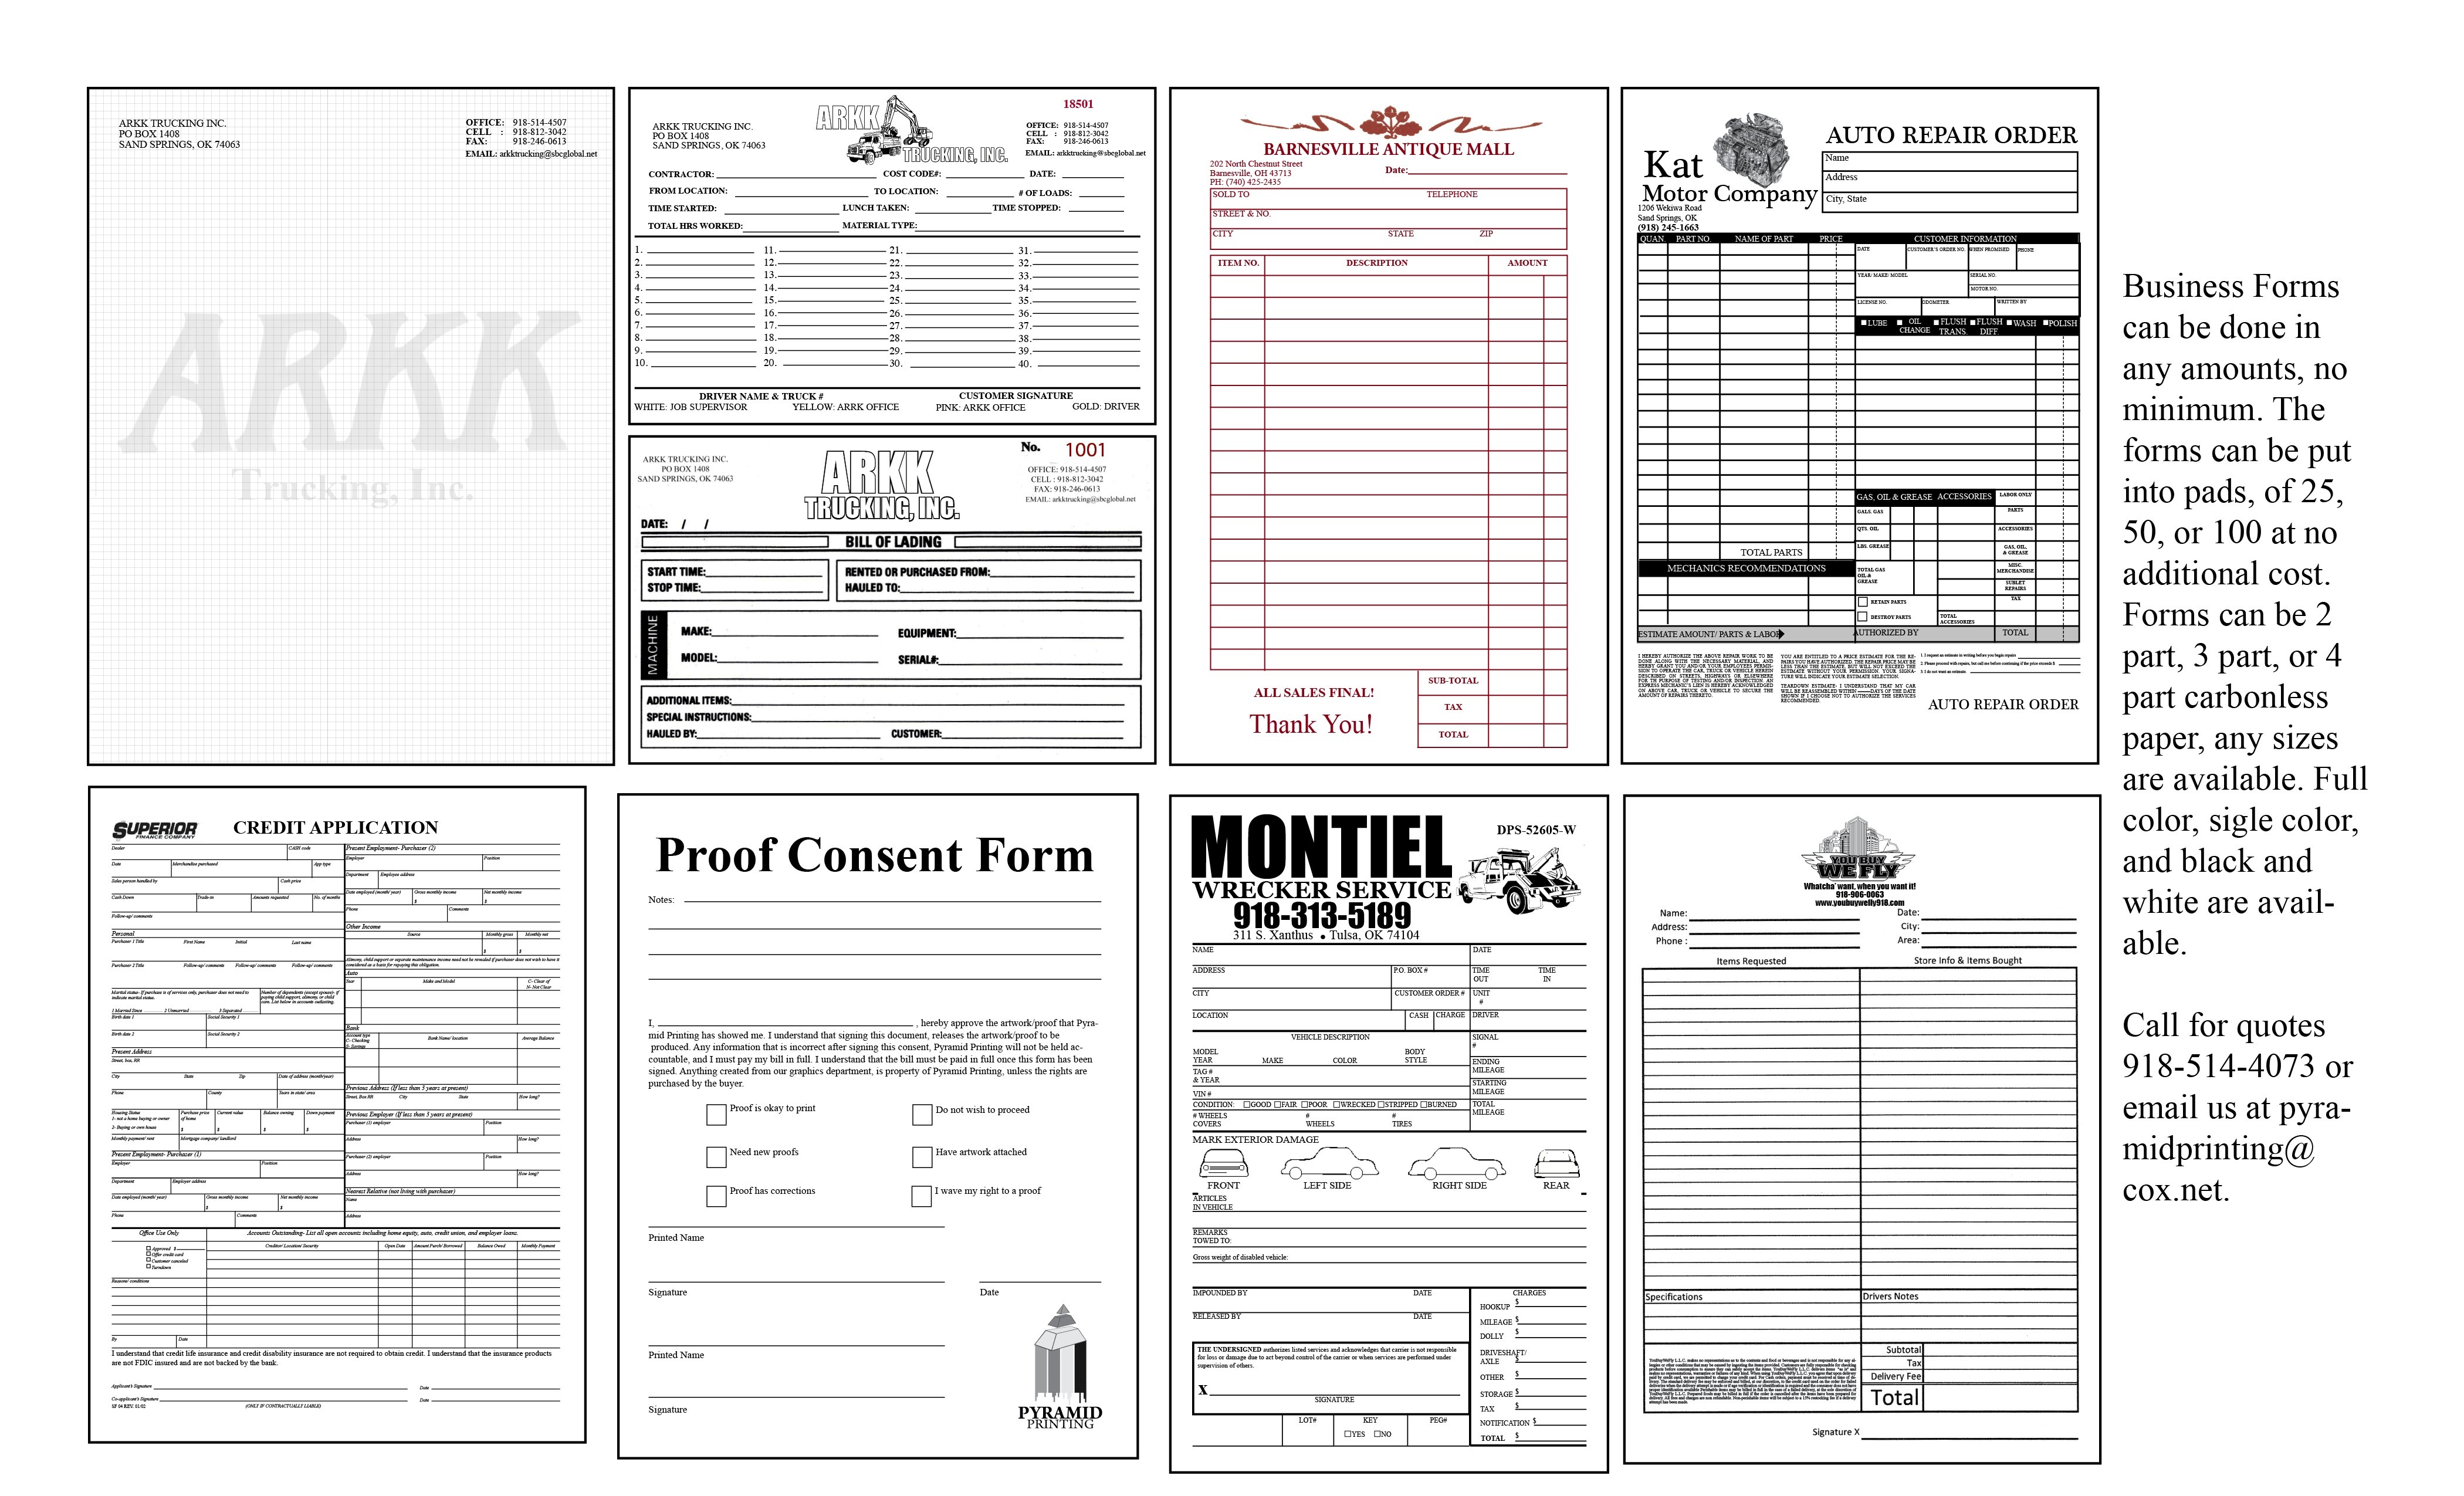 Free Business Forms Printable | Room Surf - Free Printable Business Forms